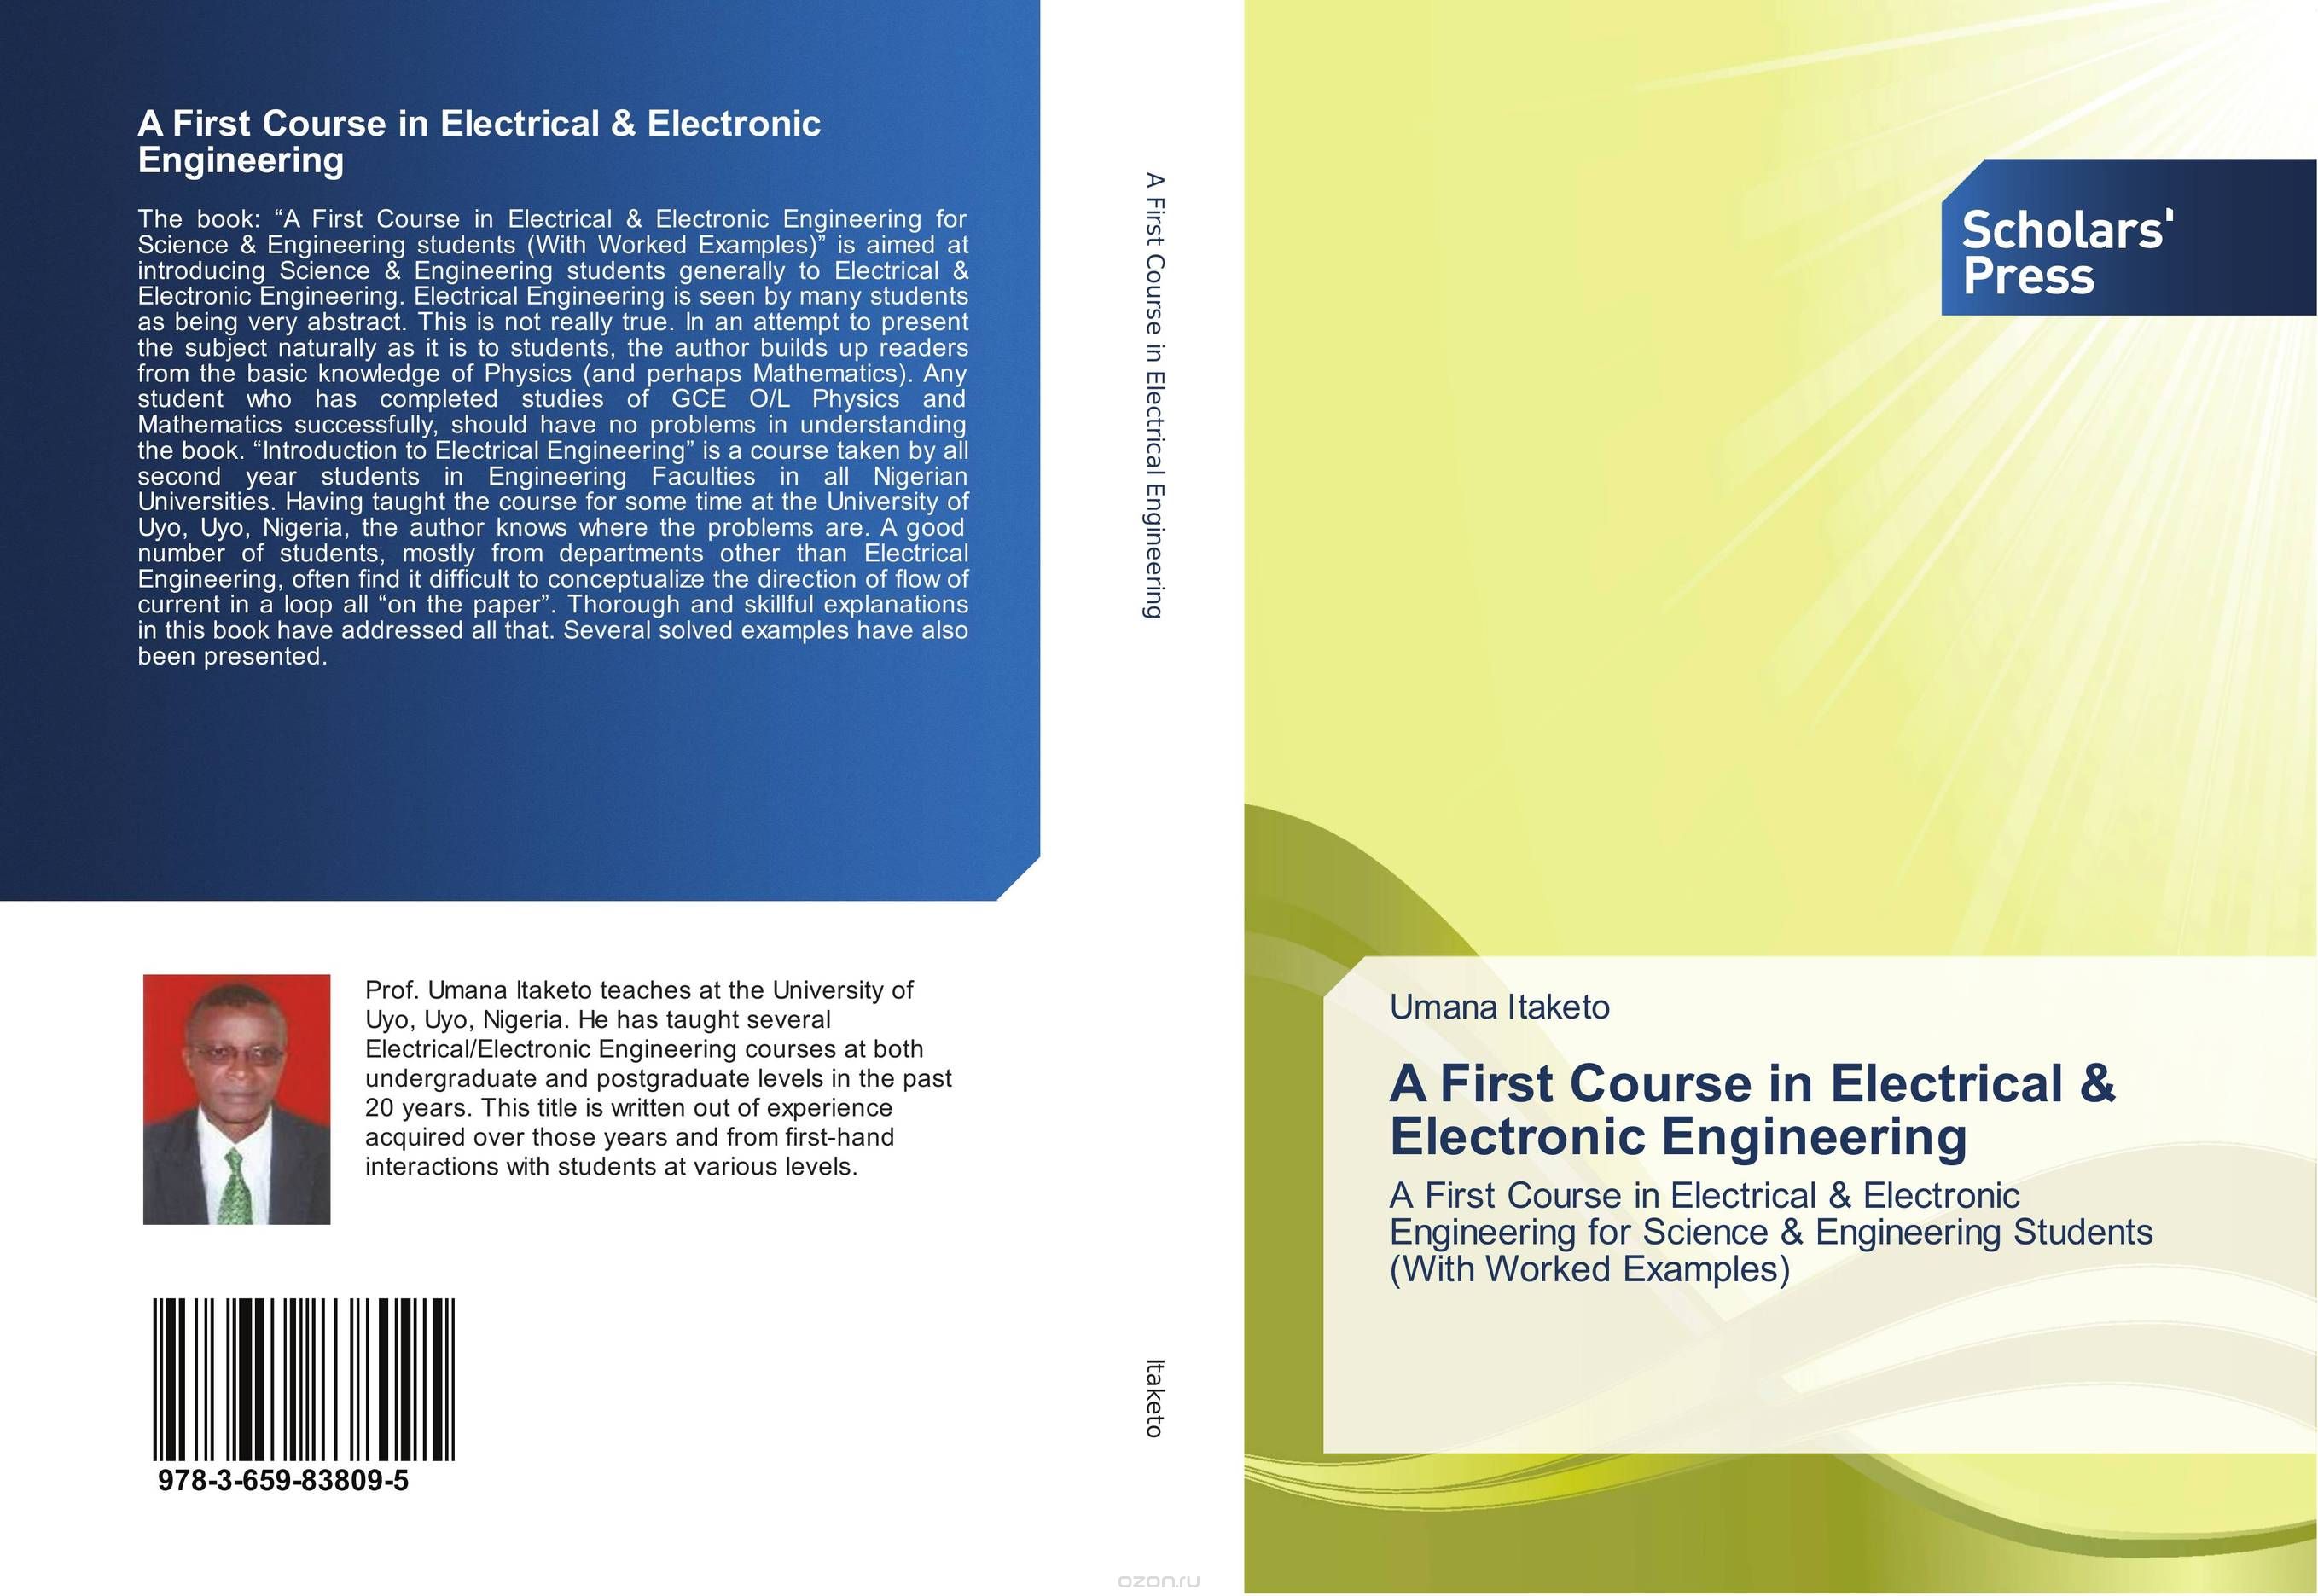 Скачать книгу "A First Course in Electrical & Electronic Engineering"